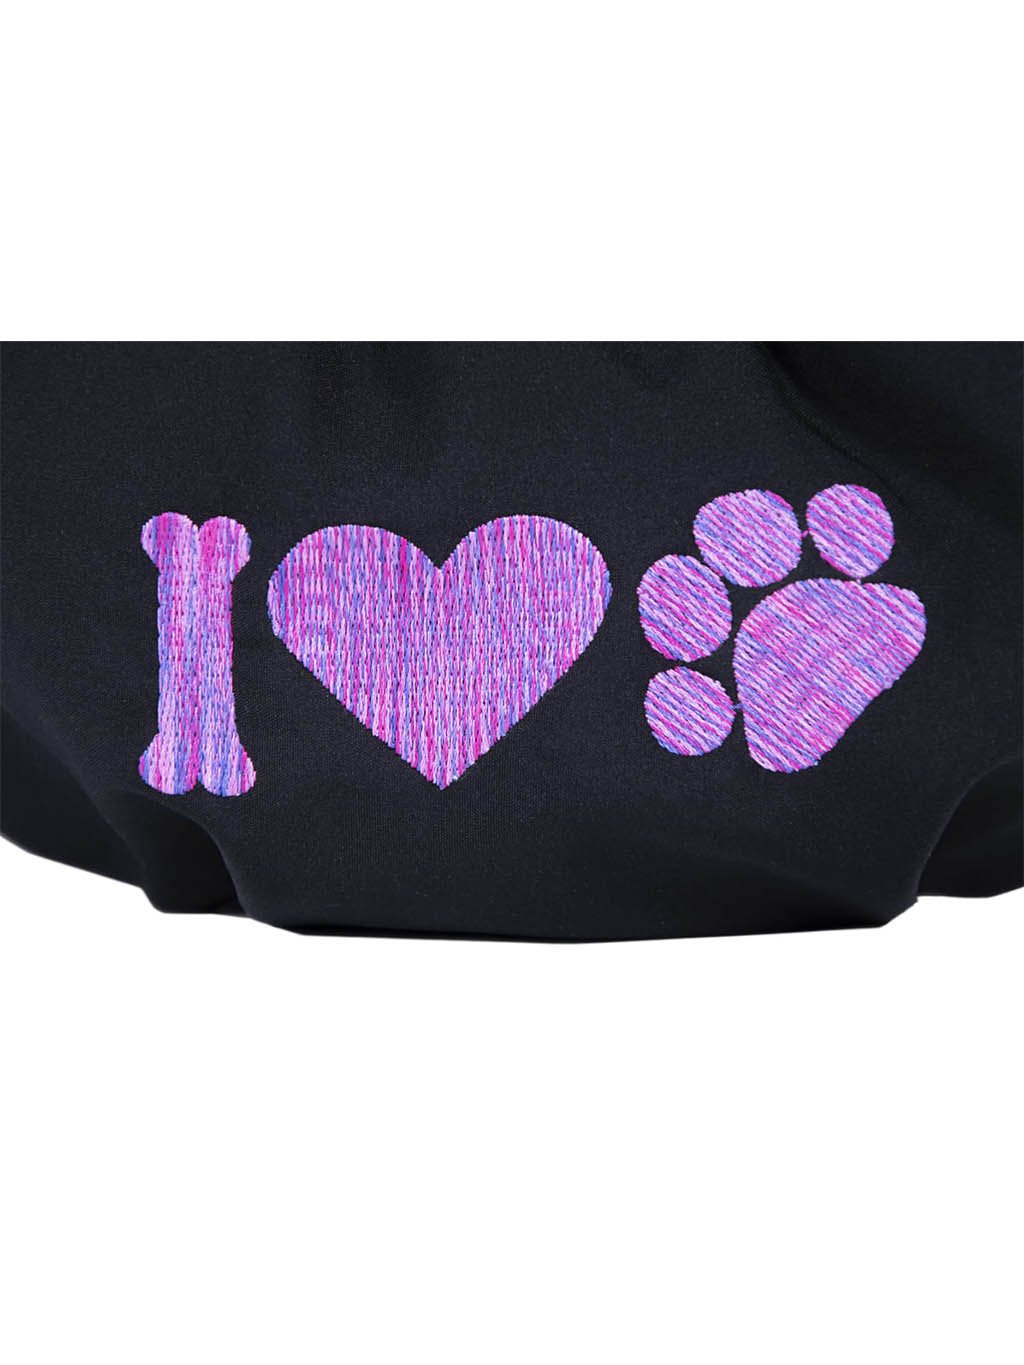 Dog training treat pouch 2 in 1 I love dogs No. 10